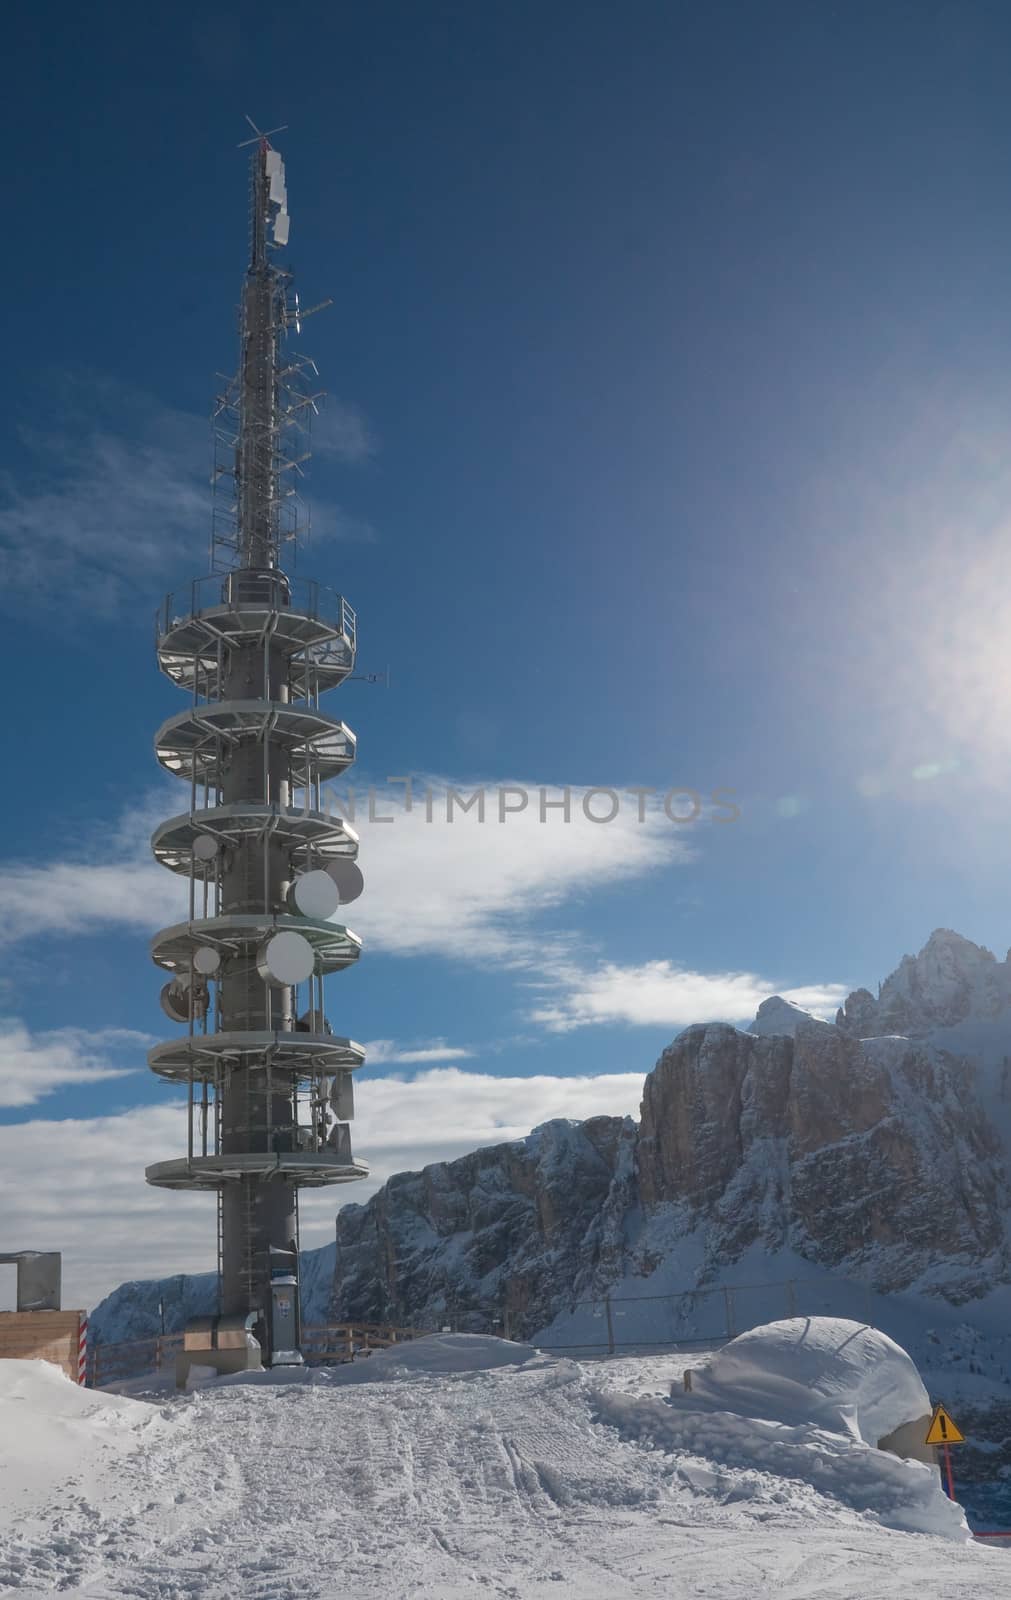 Communication tower with antennas. Selva di Val Gardena, Italy by nikolpetr